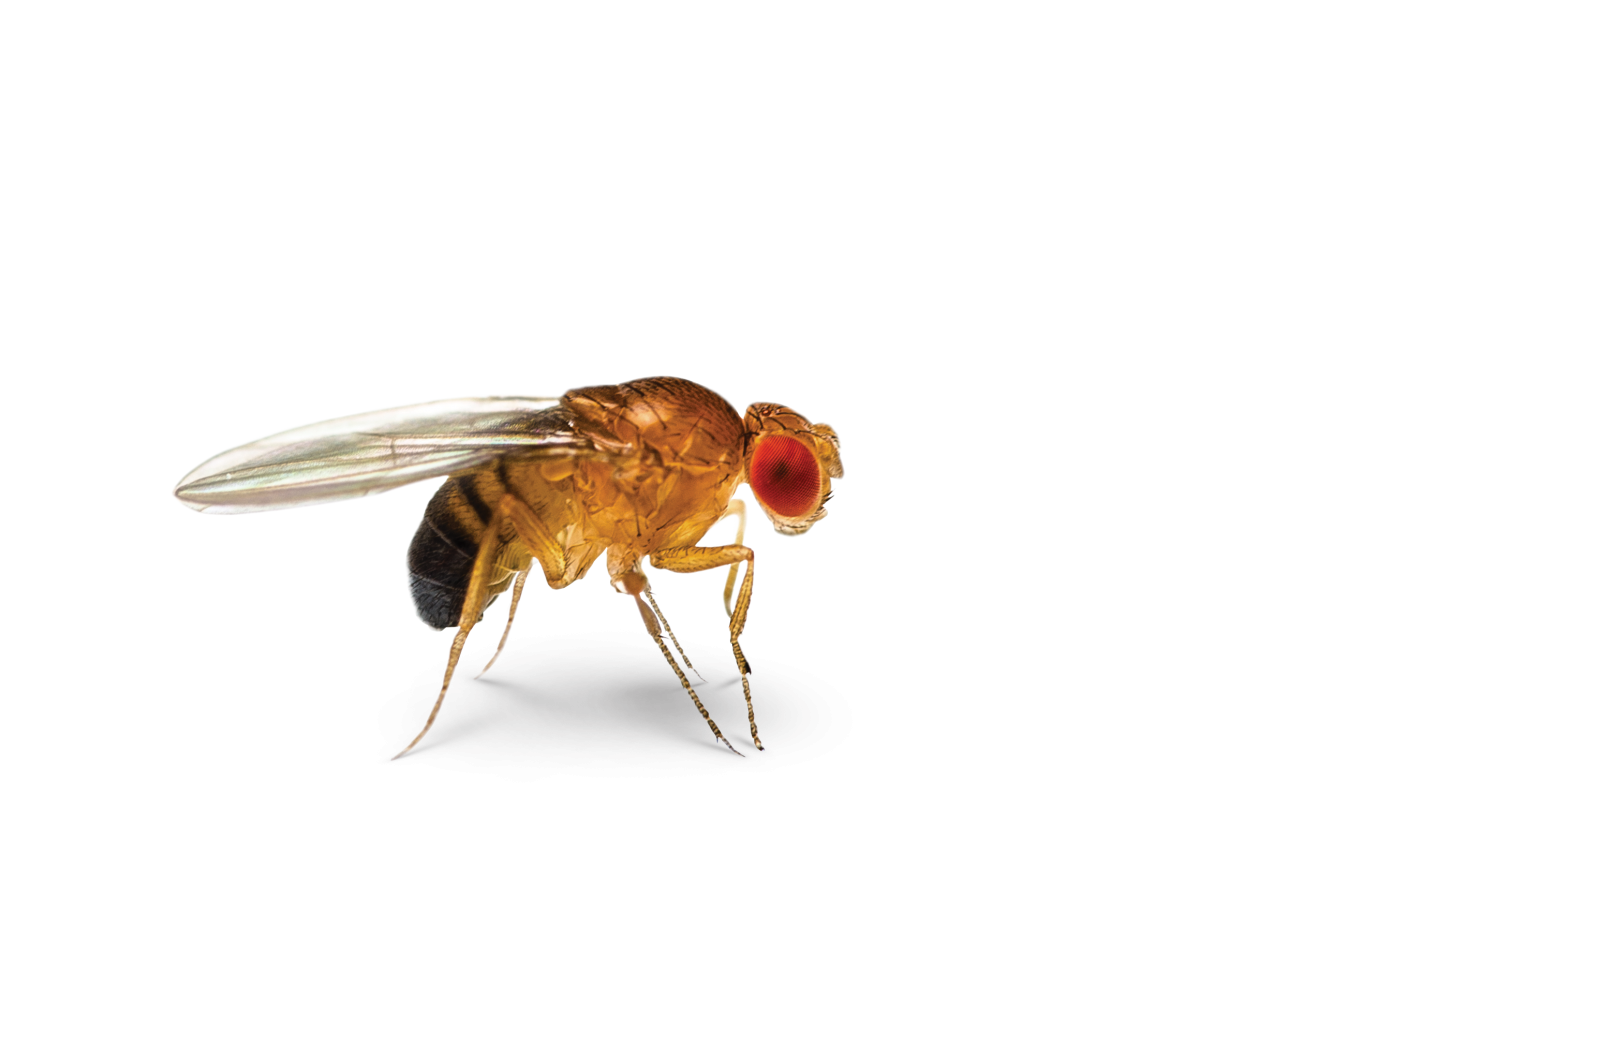 Insect Cockroach Common fruit fly Fruit flies Pest